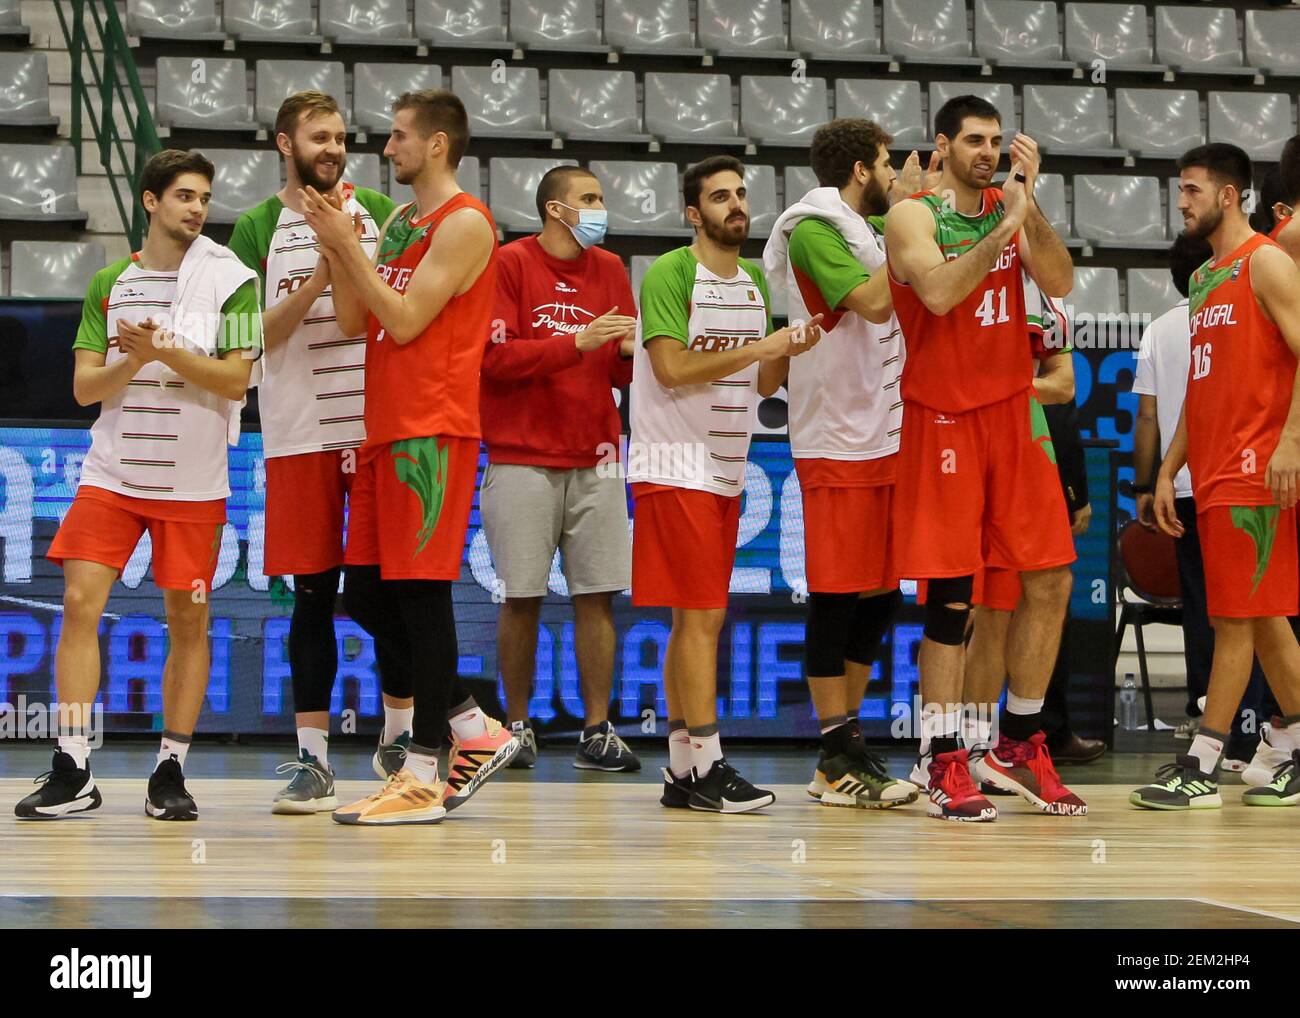 Matosinhos, 11/28/2020 -The Albanian Basketball Team received this  afternoon the Portuguese Basketball Team, in the Pavilion of the Sports and  Congress Center of Matosinhos in game counting for the World Cup Basketball